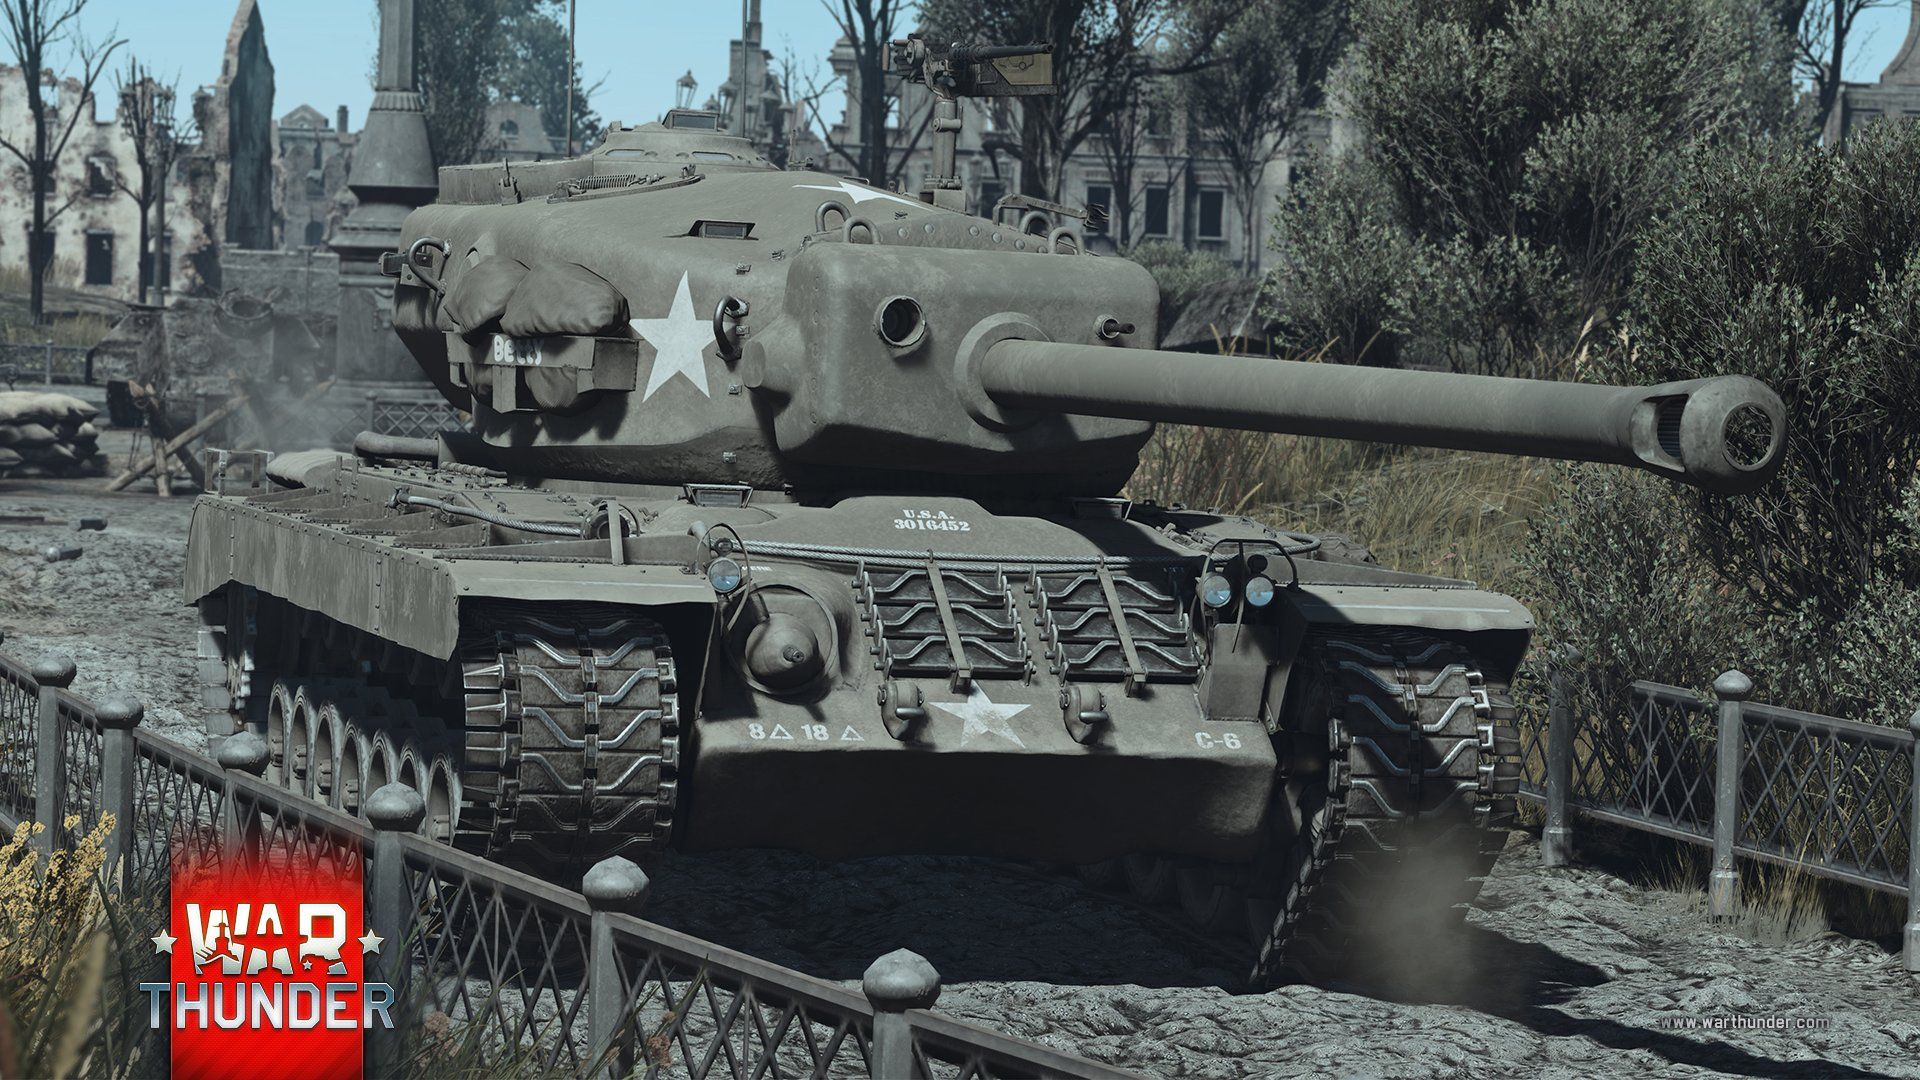 War Thunder April, 75 years ago, the T30 first appeared. Developed alongside the T29 to counter heavy enemy tanks, the T30 also proved to excel at demolition using its